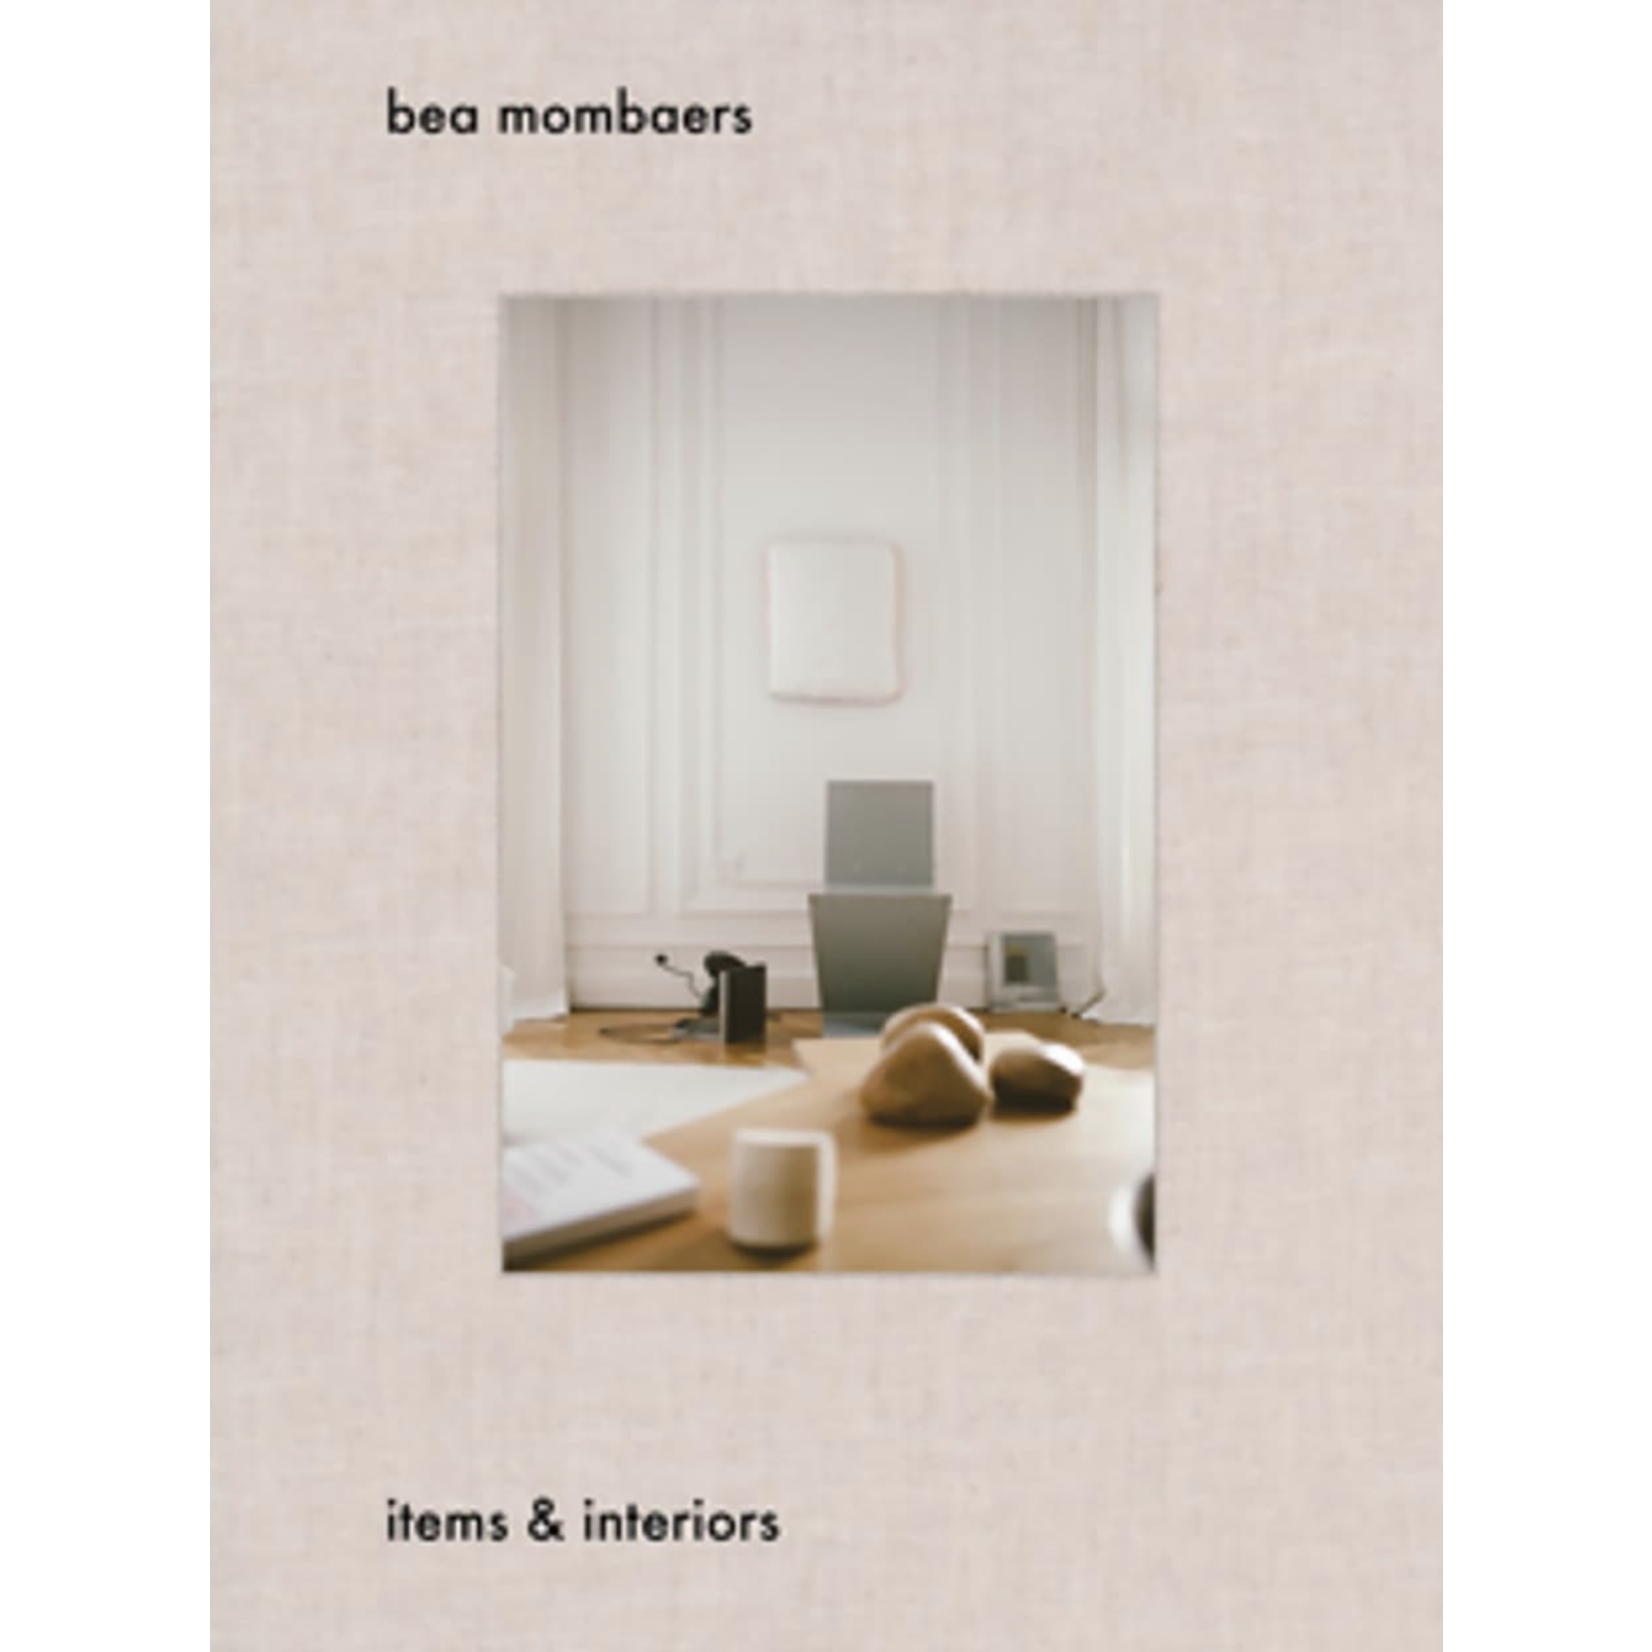 Outside The Box Bea Mombaers Items & Interiors Hardcover Book